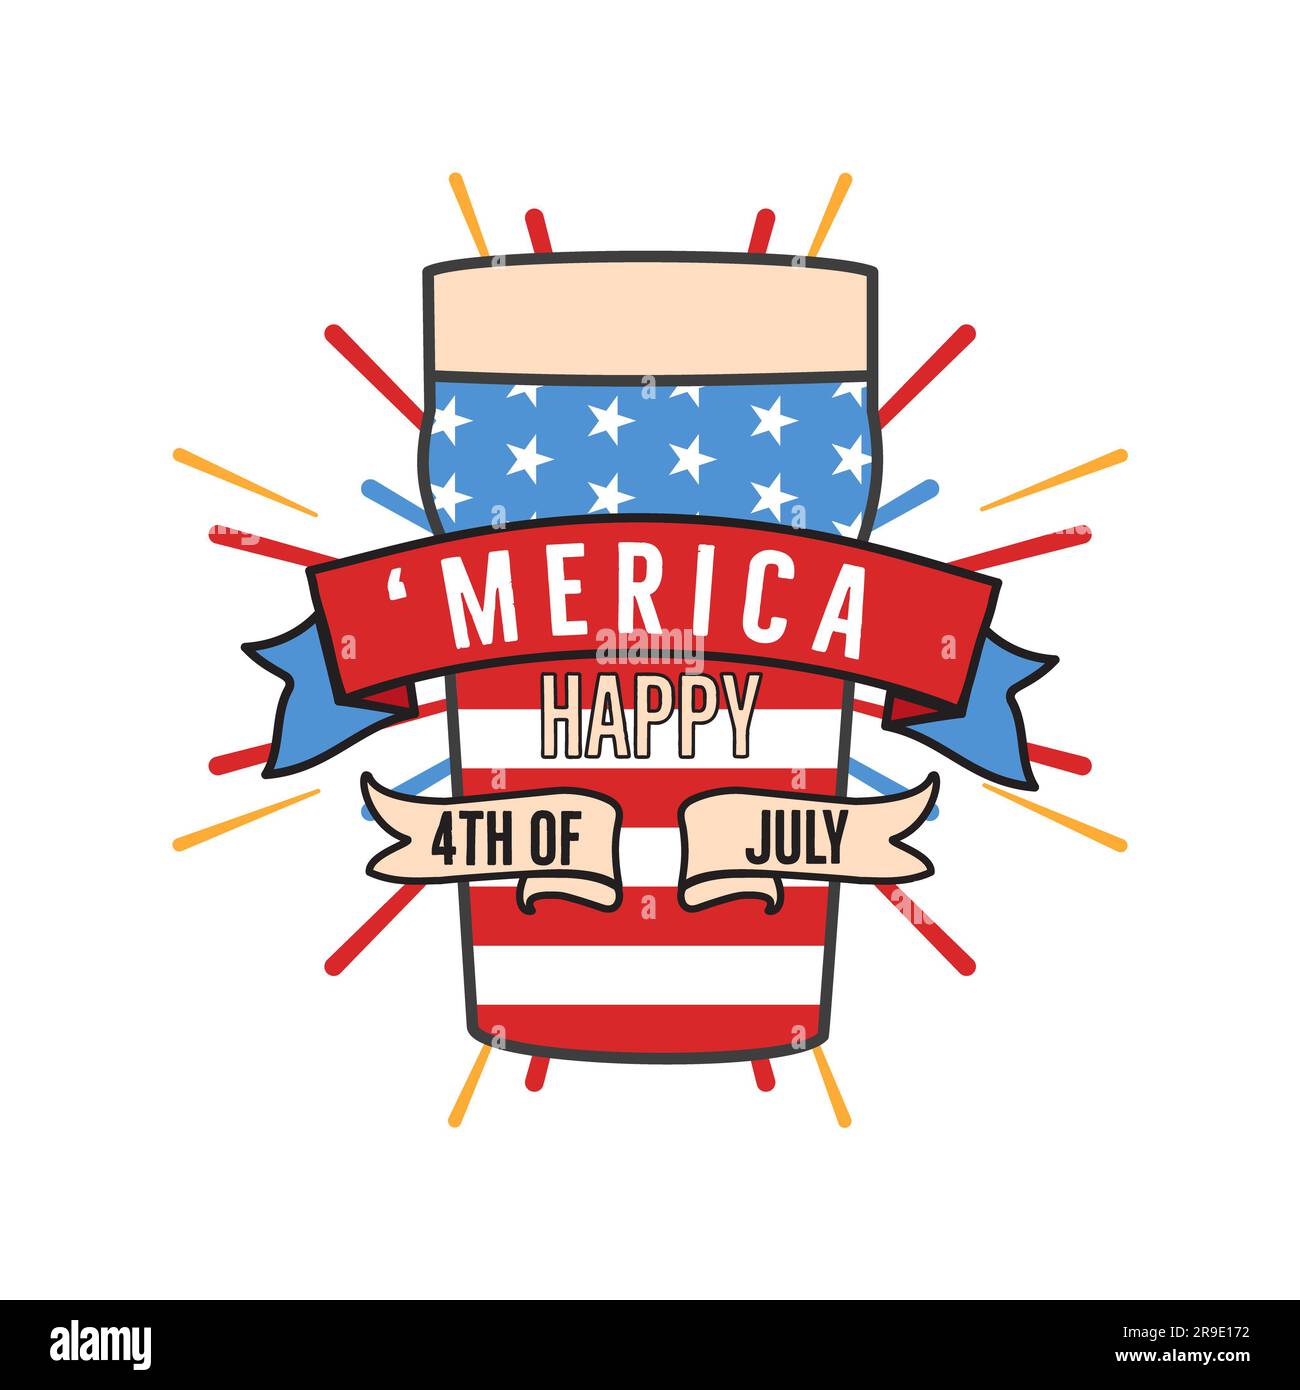 4th of July typography design with quote - Merica and beer. US Independence Day clipart. Fourth of July calligraphy, lettering composition. emblem for Stock Photo